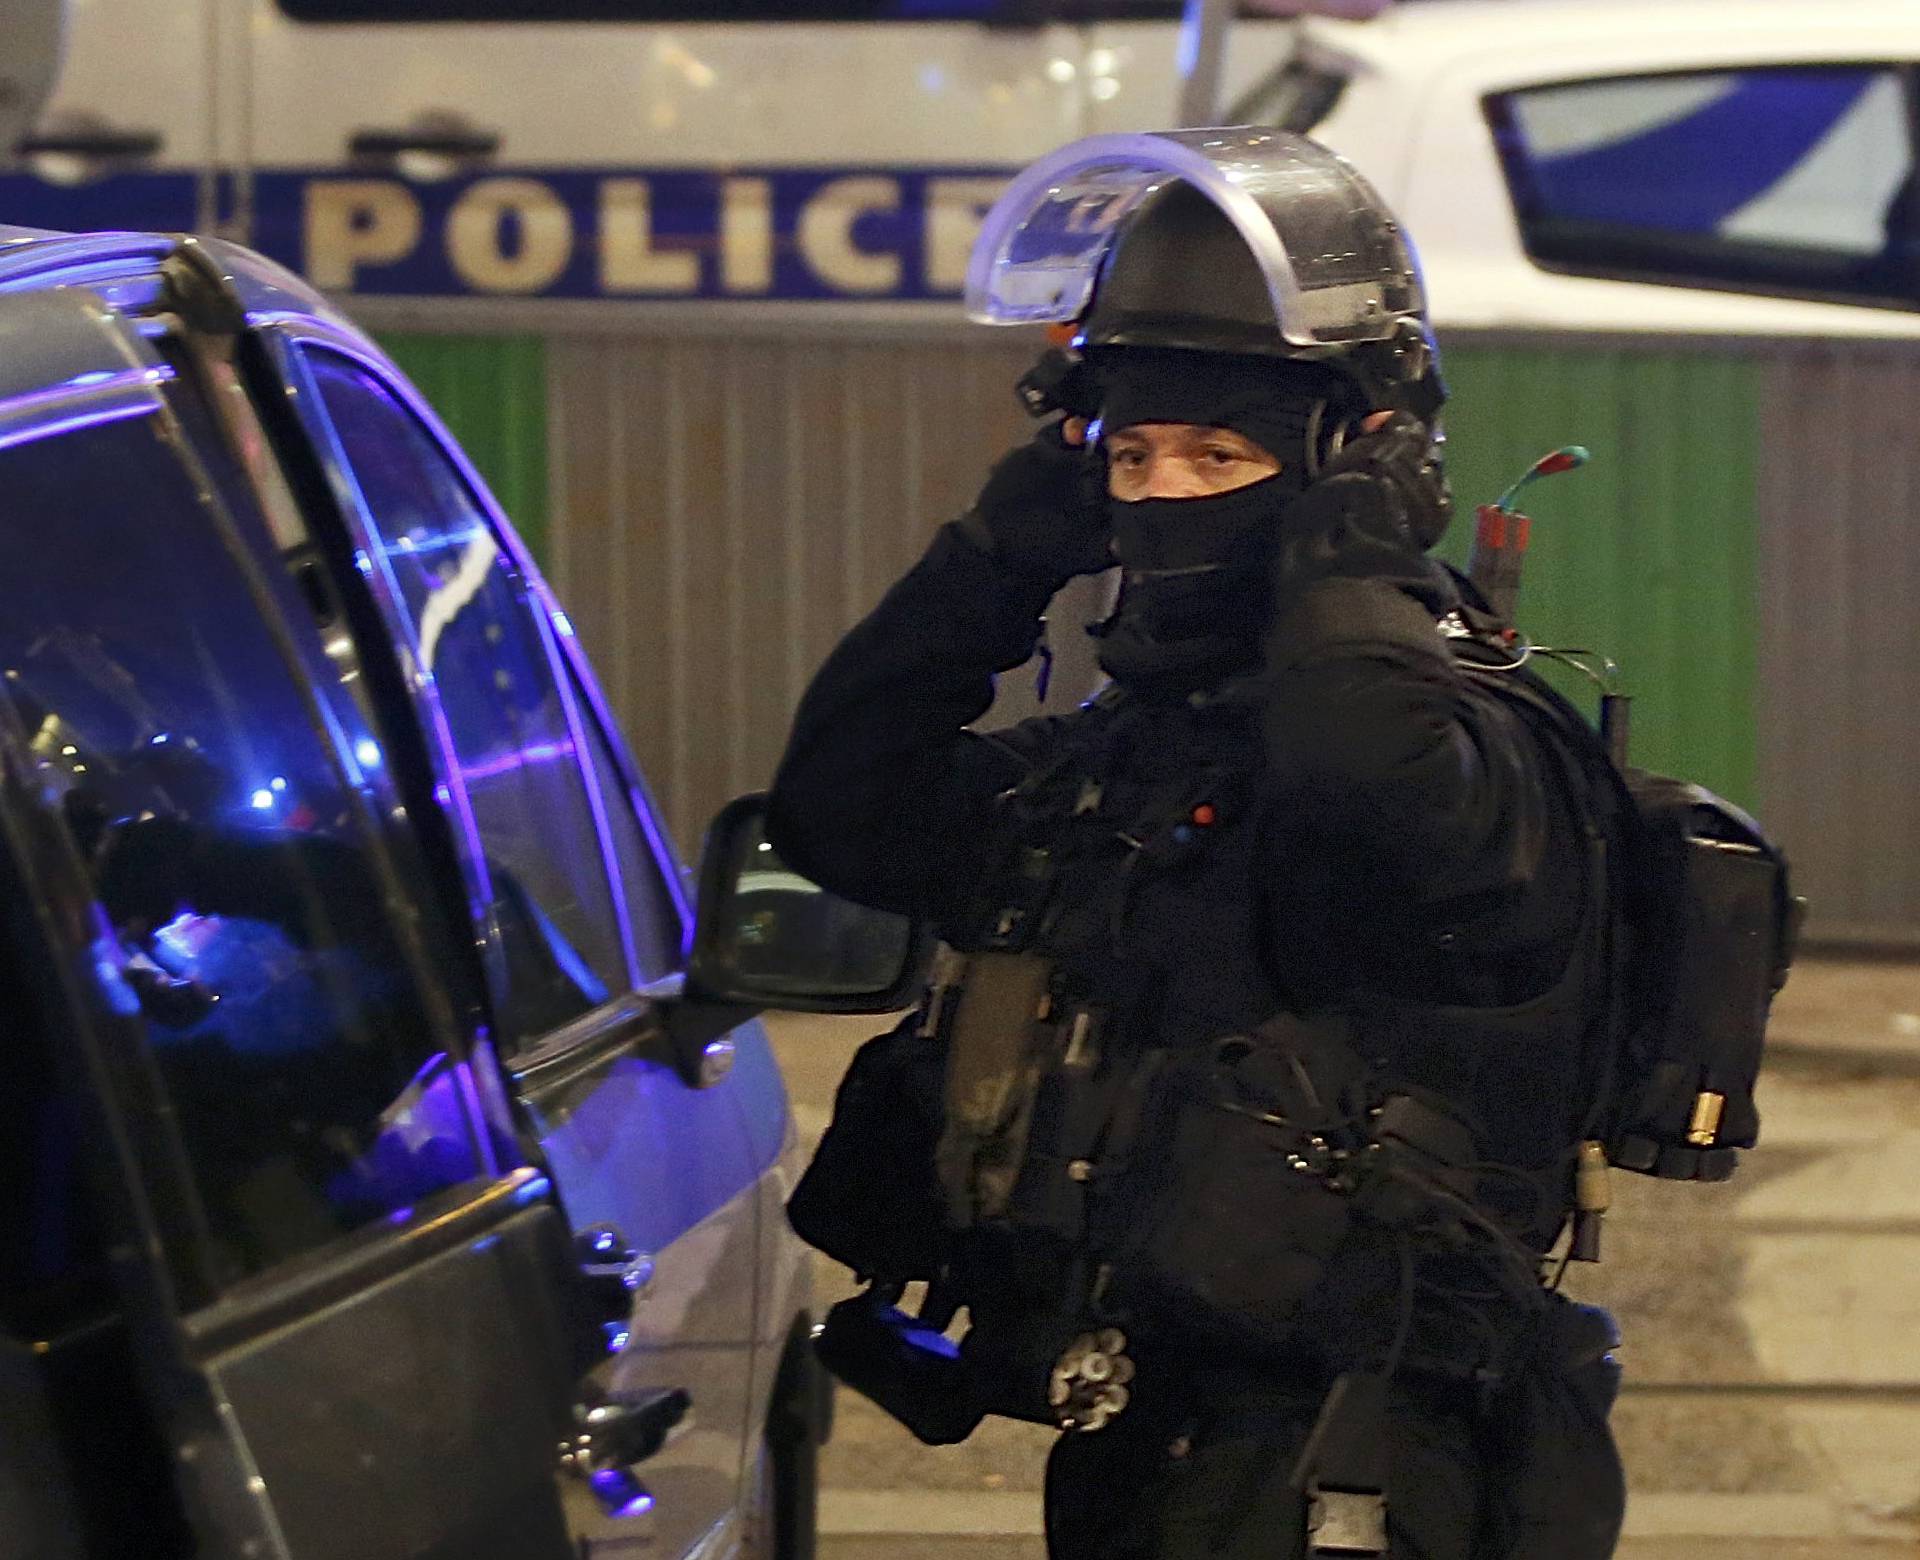 A member of a special French police brigade secures a street near the travel agency where a gunman has taken hostage about half a dozen people in what appears to be a robbery, a police source said, in Paris